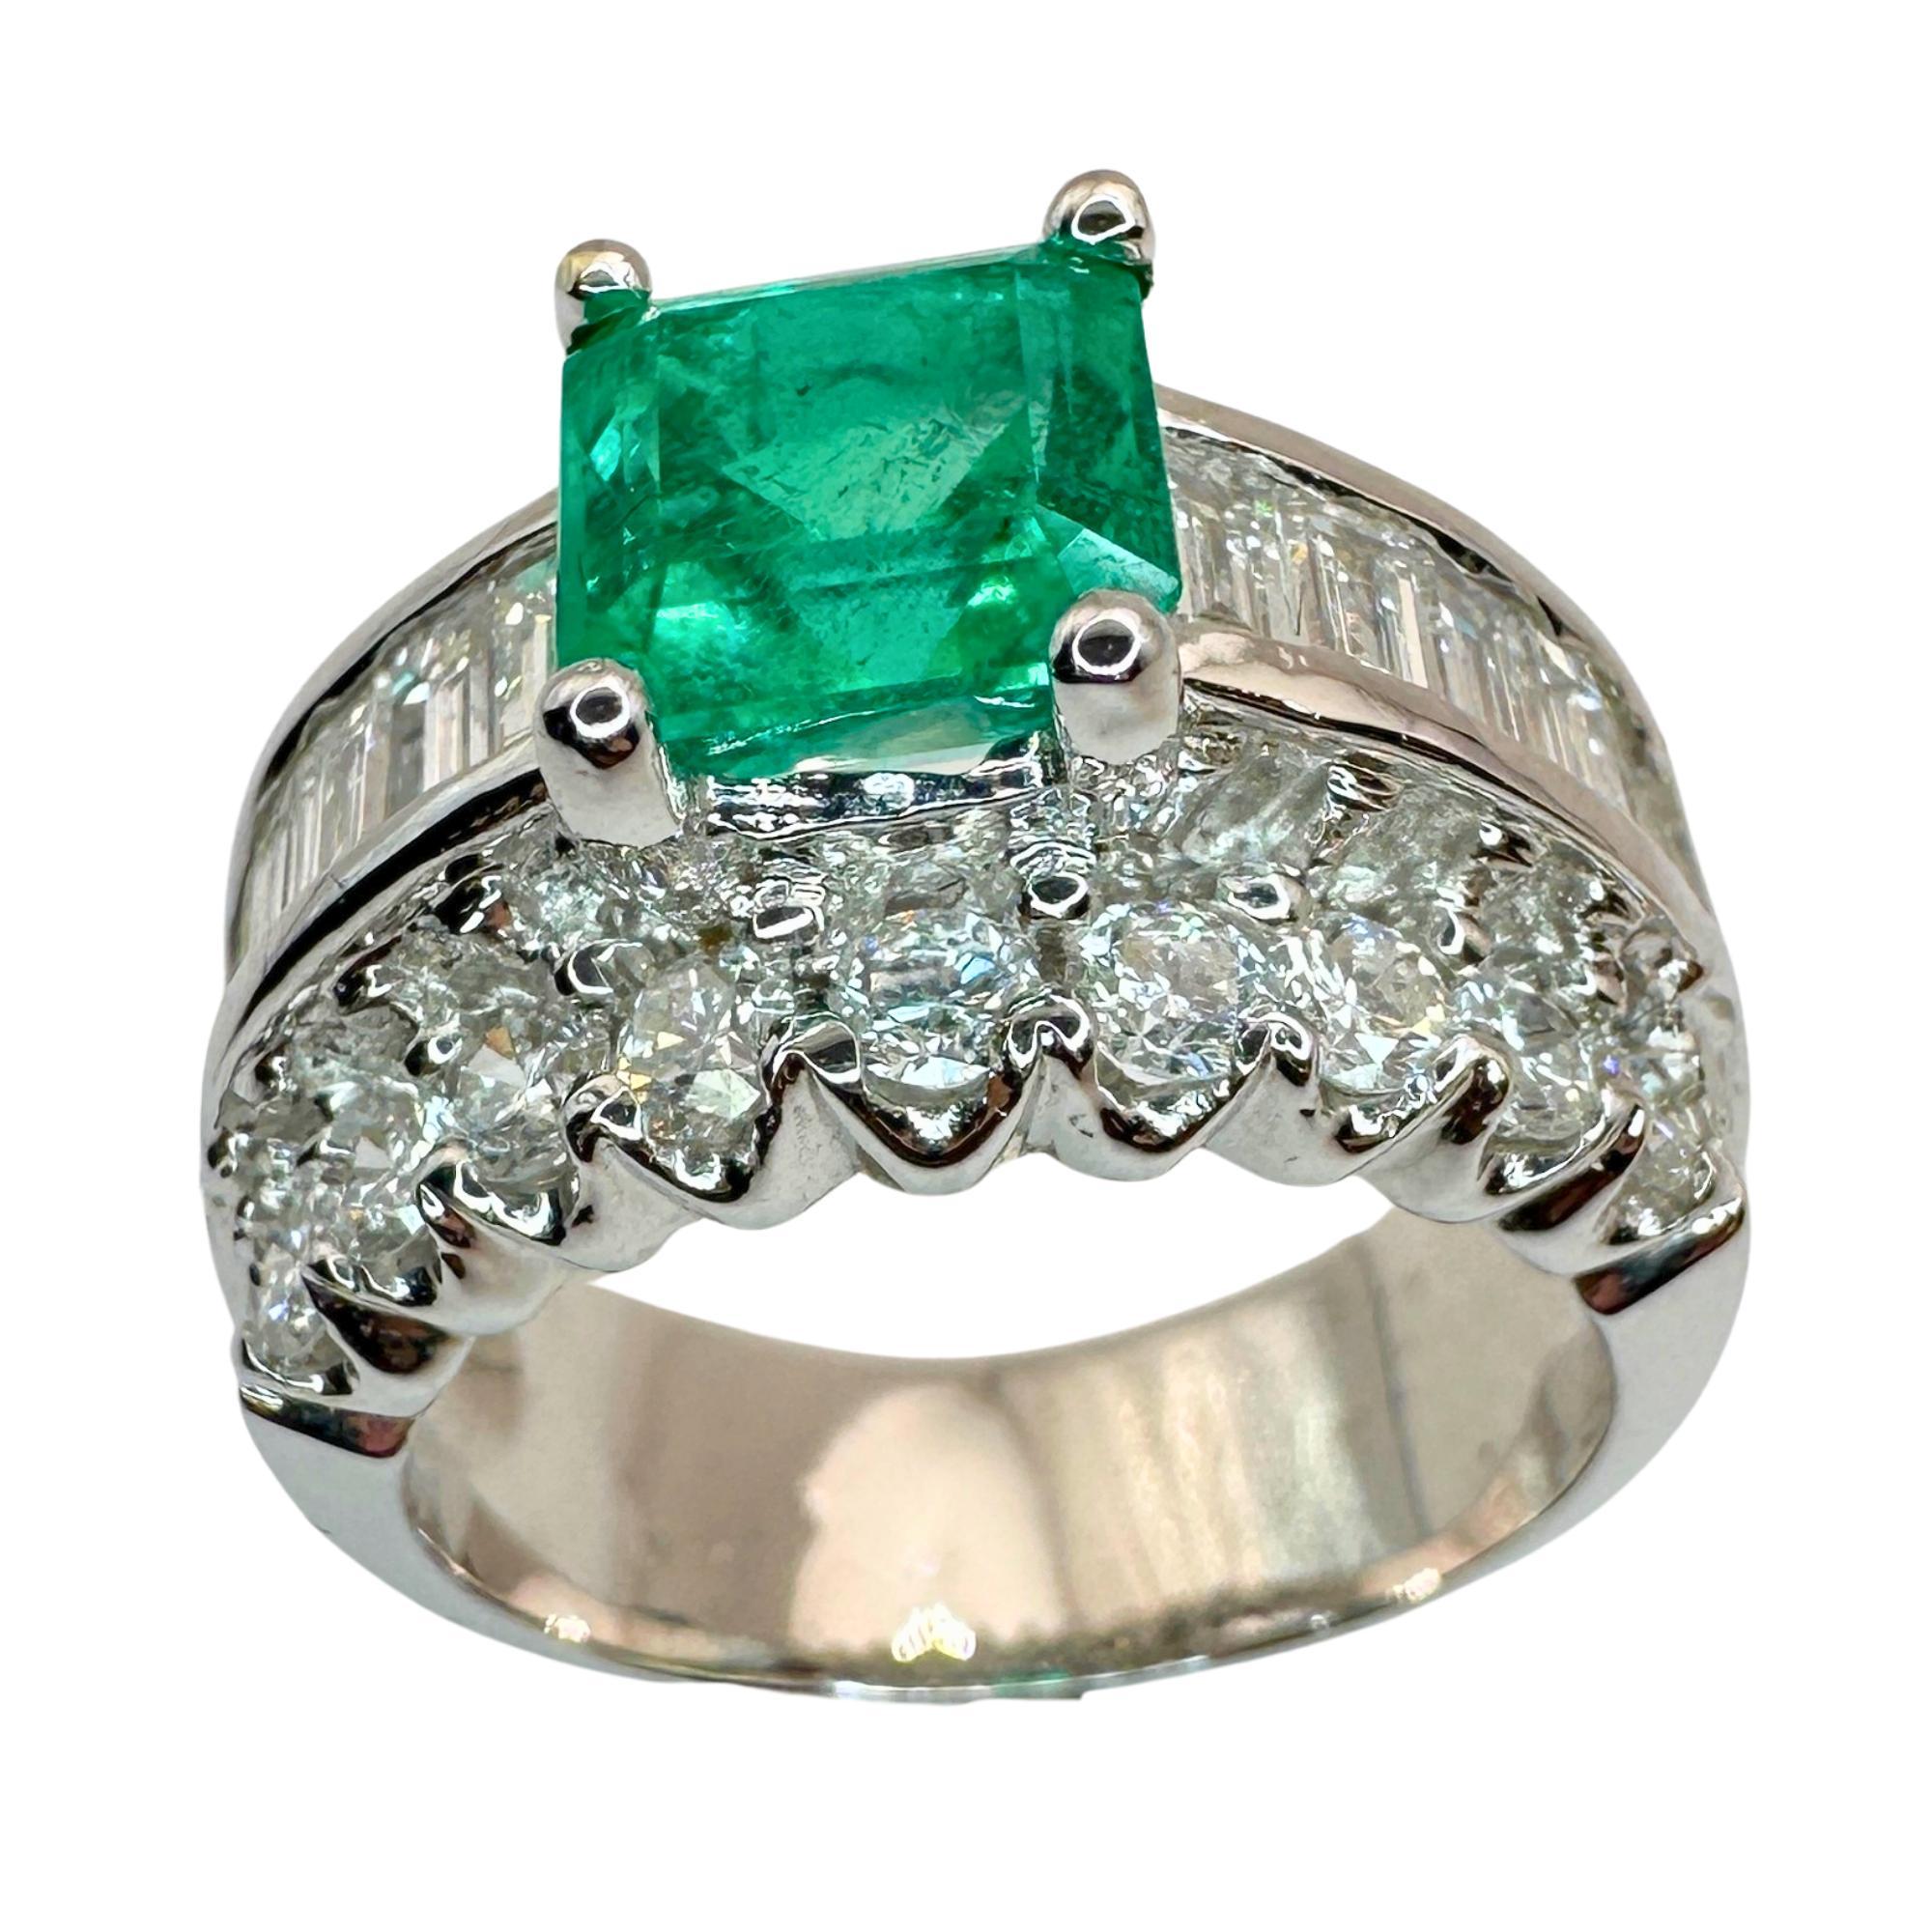 Indulge in luxury with our stunning 18k Diamond and Emerald Wide Band Ring! Crafted with 2.13 carats of sparkling diamonds and stunning 1.80 carats of emeralds, this ring exudes elegance and sophistication. Made with 18k white gold and weighing